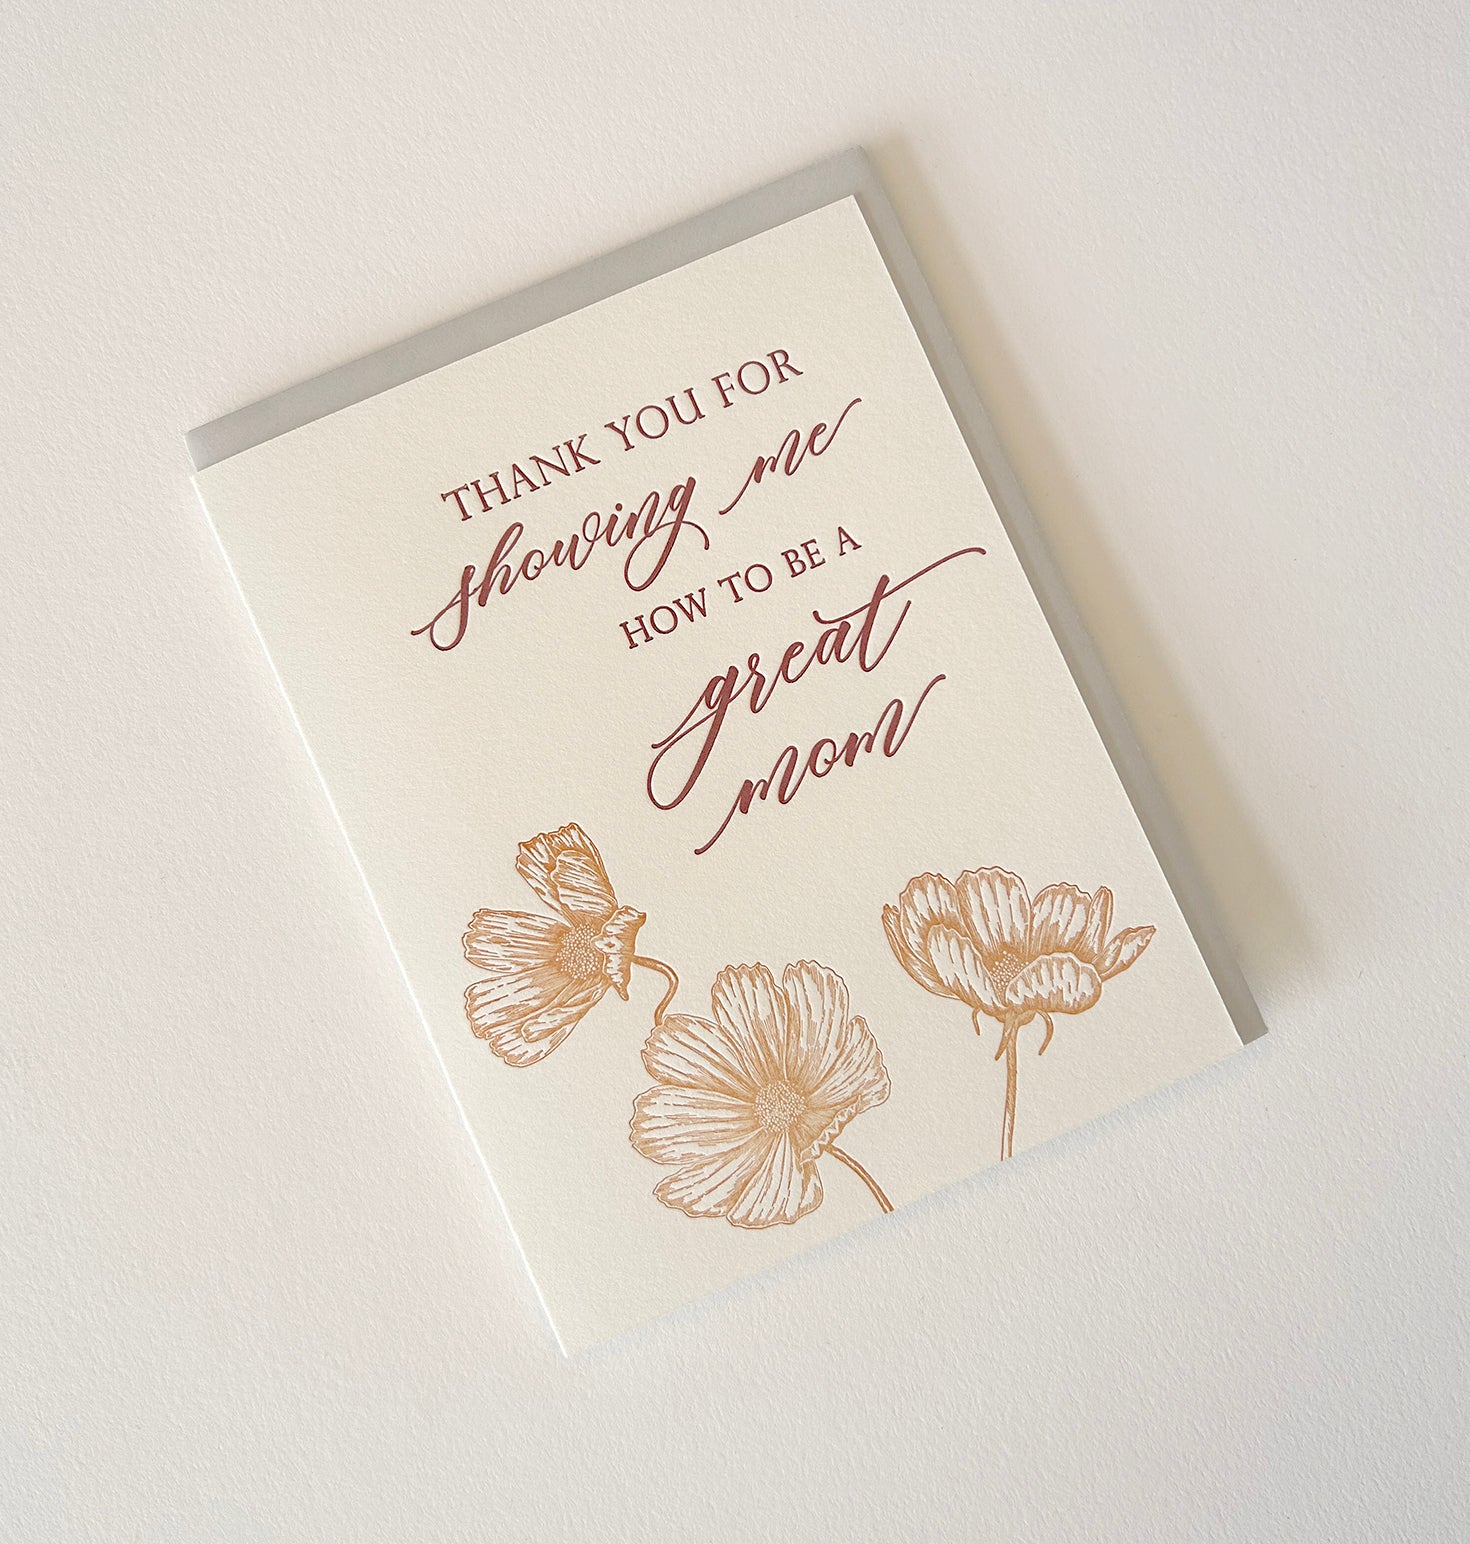 Letterpress mother's day card with florals that says "Thank you for showing me how to be a great mom" by Rust Belt Love